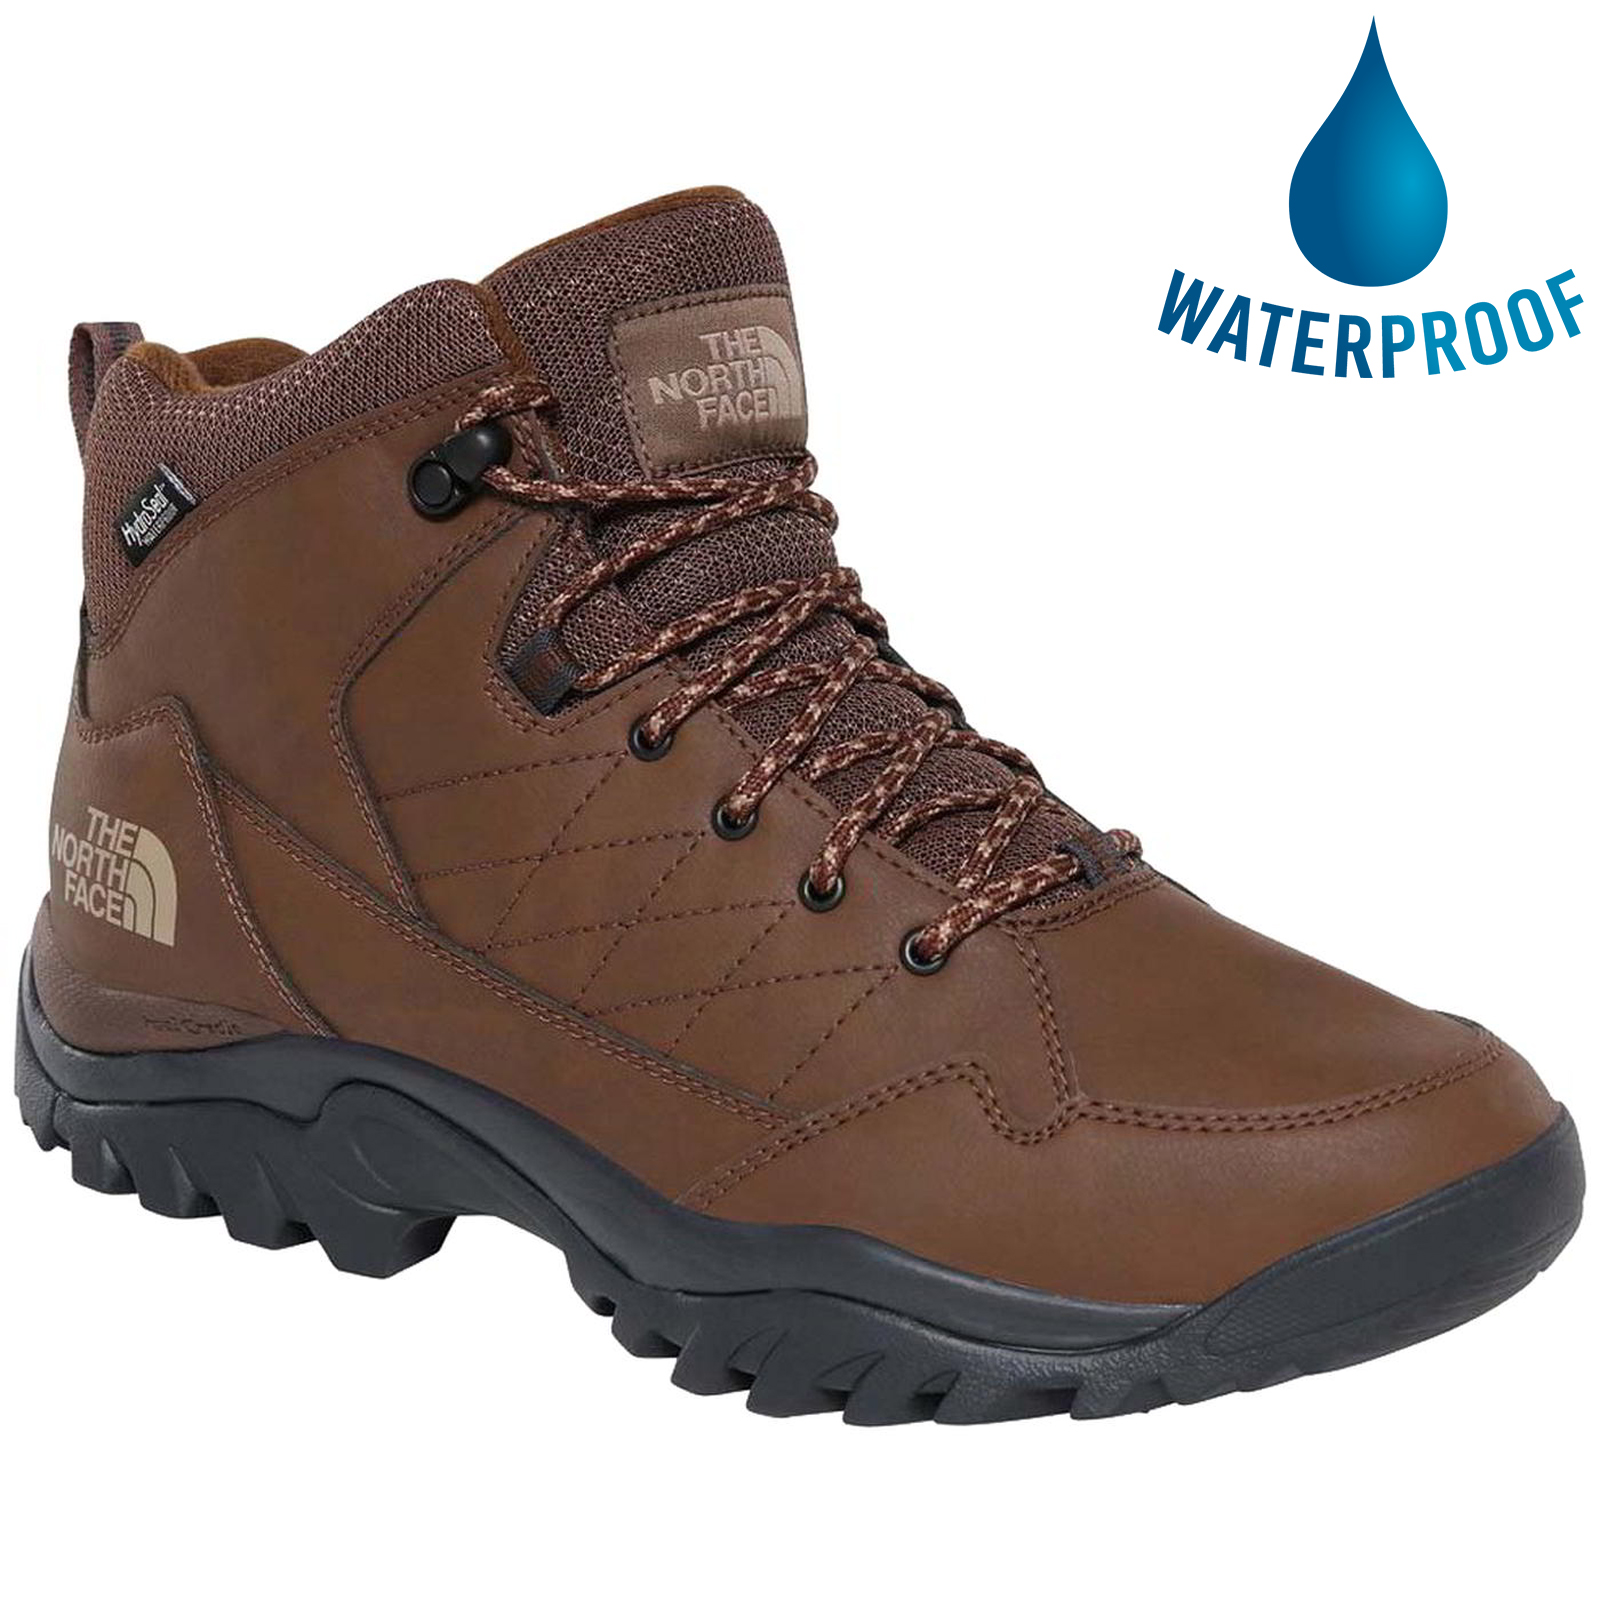 The North Face Mens Storm Strike II Waterproof Boots - Carafe Brown 2951